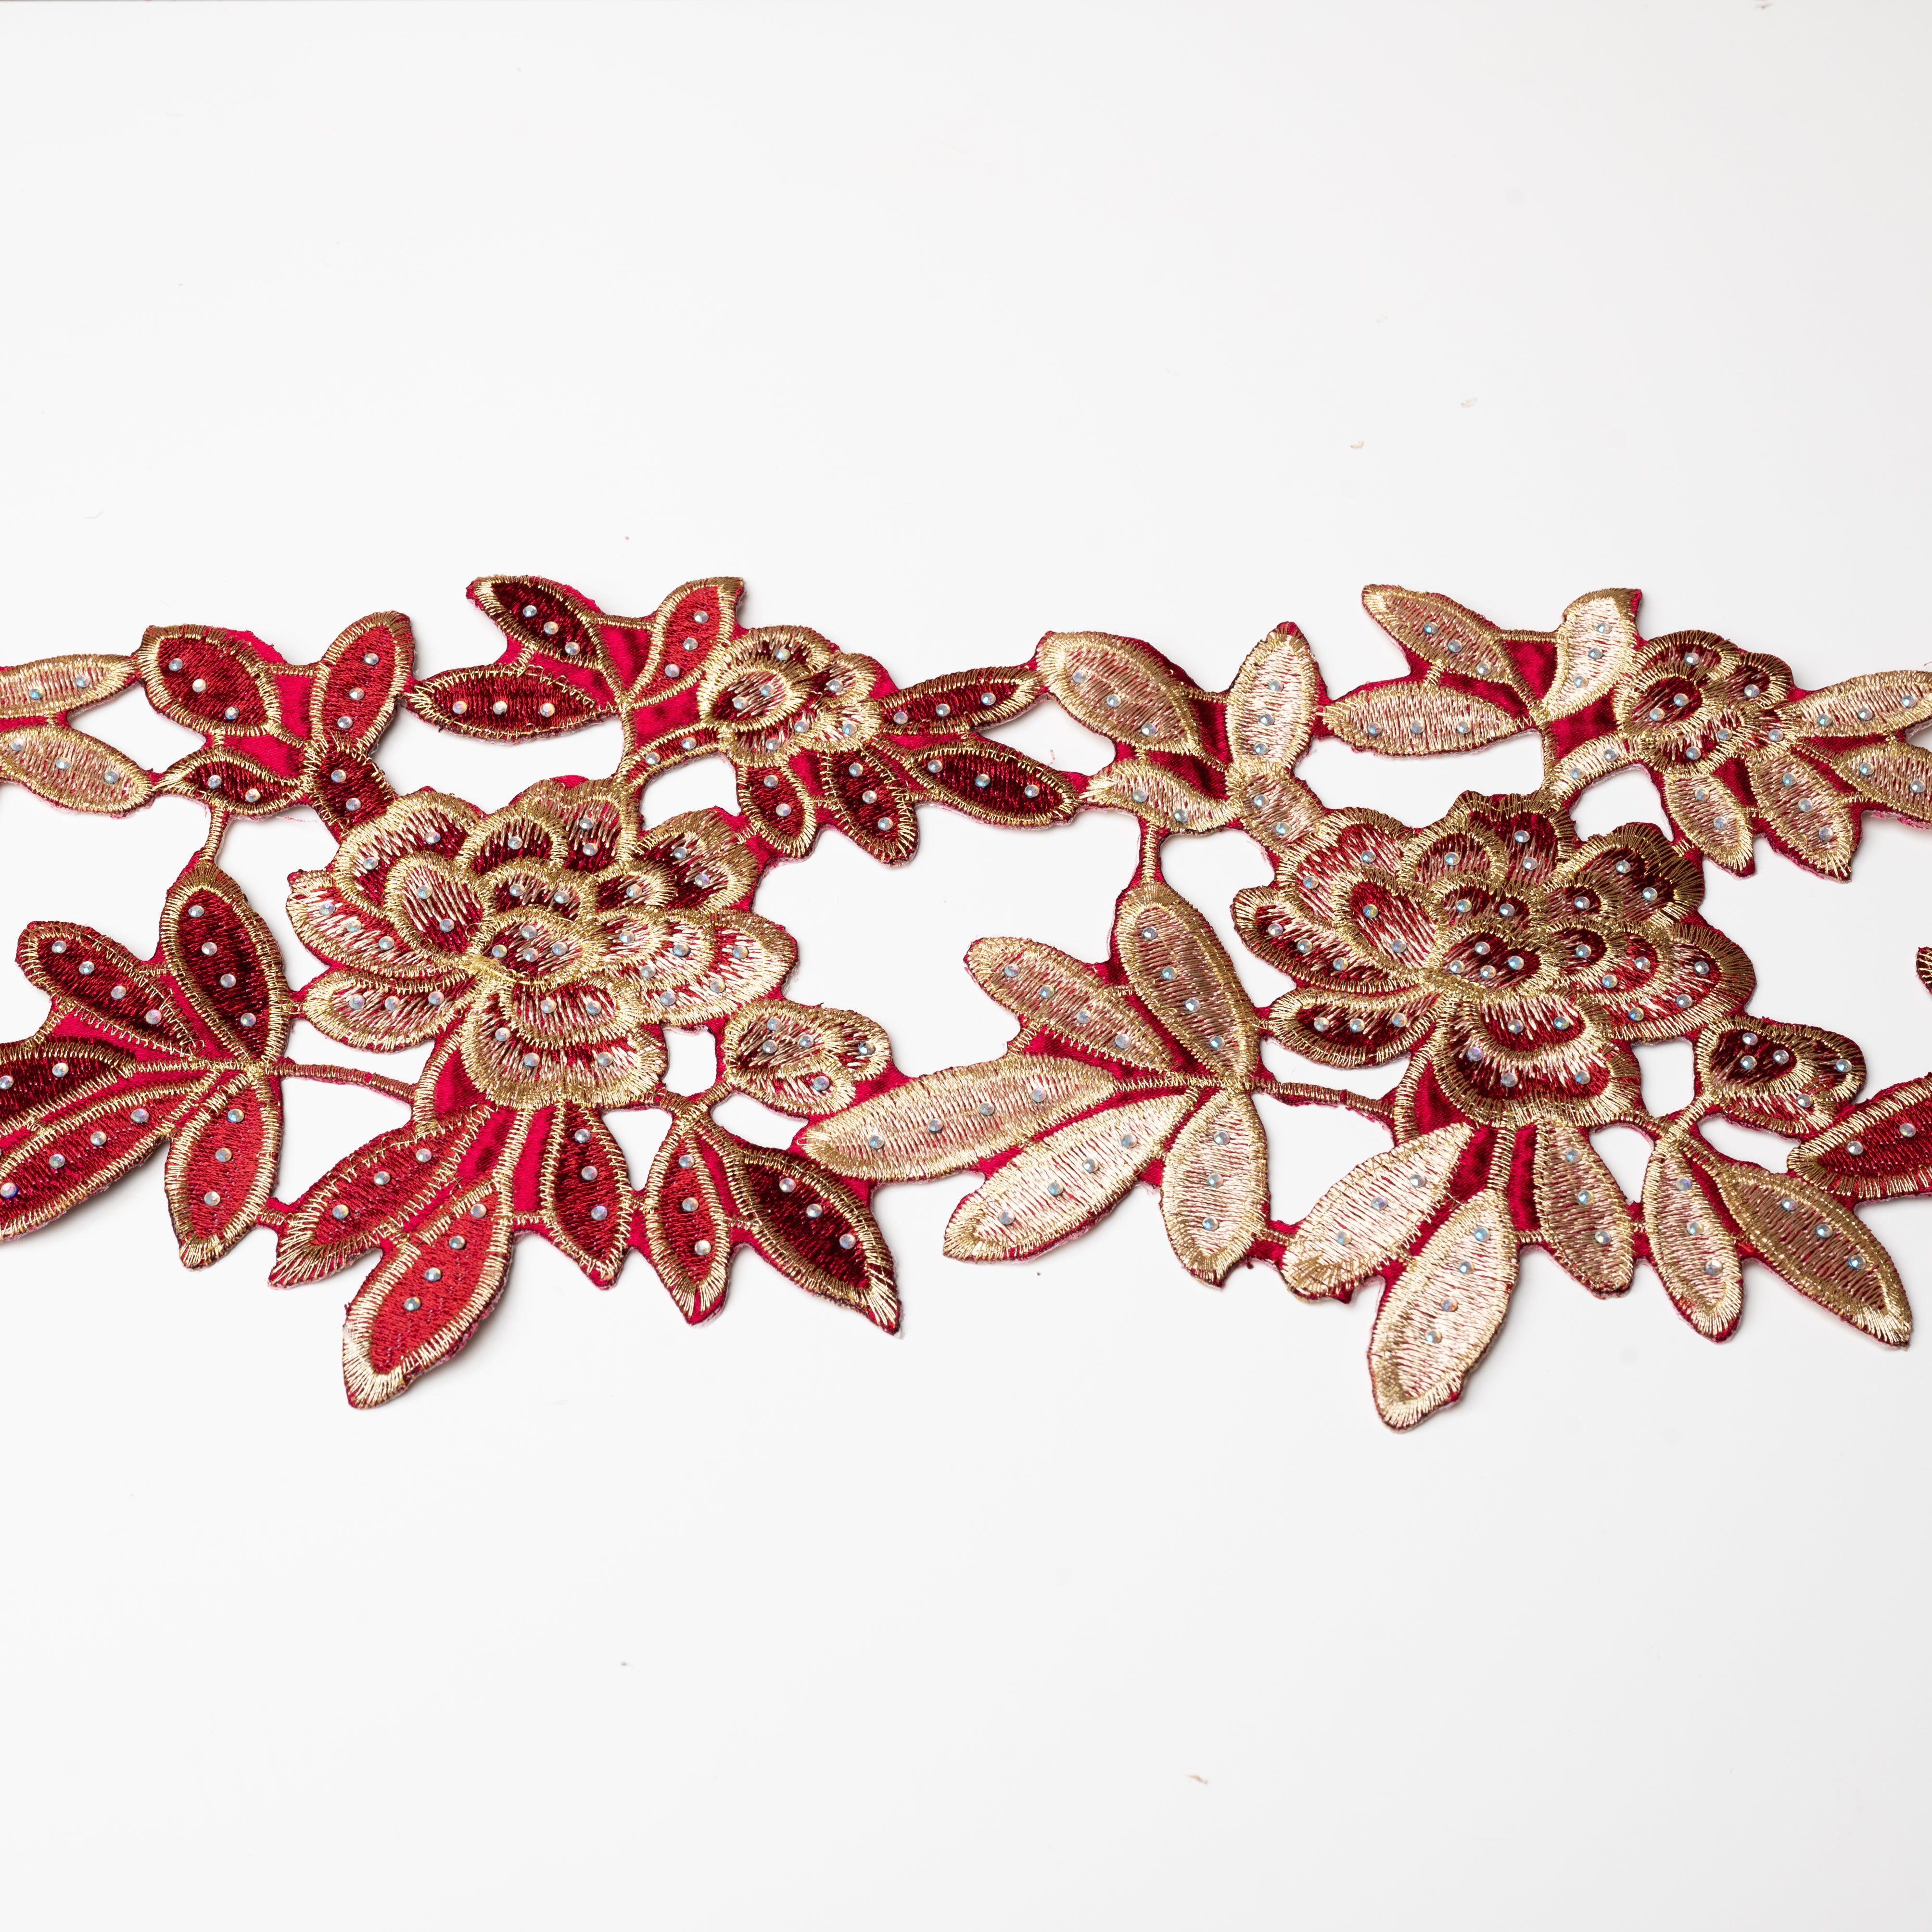 Heavily embroidered burgundy and gold floral iron on applique scattered with hot fix AB crystals.  The petals and leaves are outlined with gold thread.